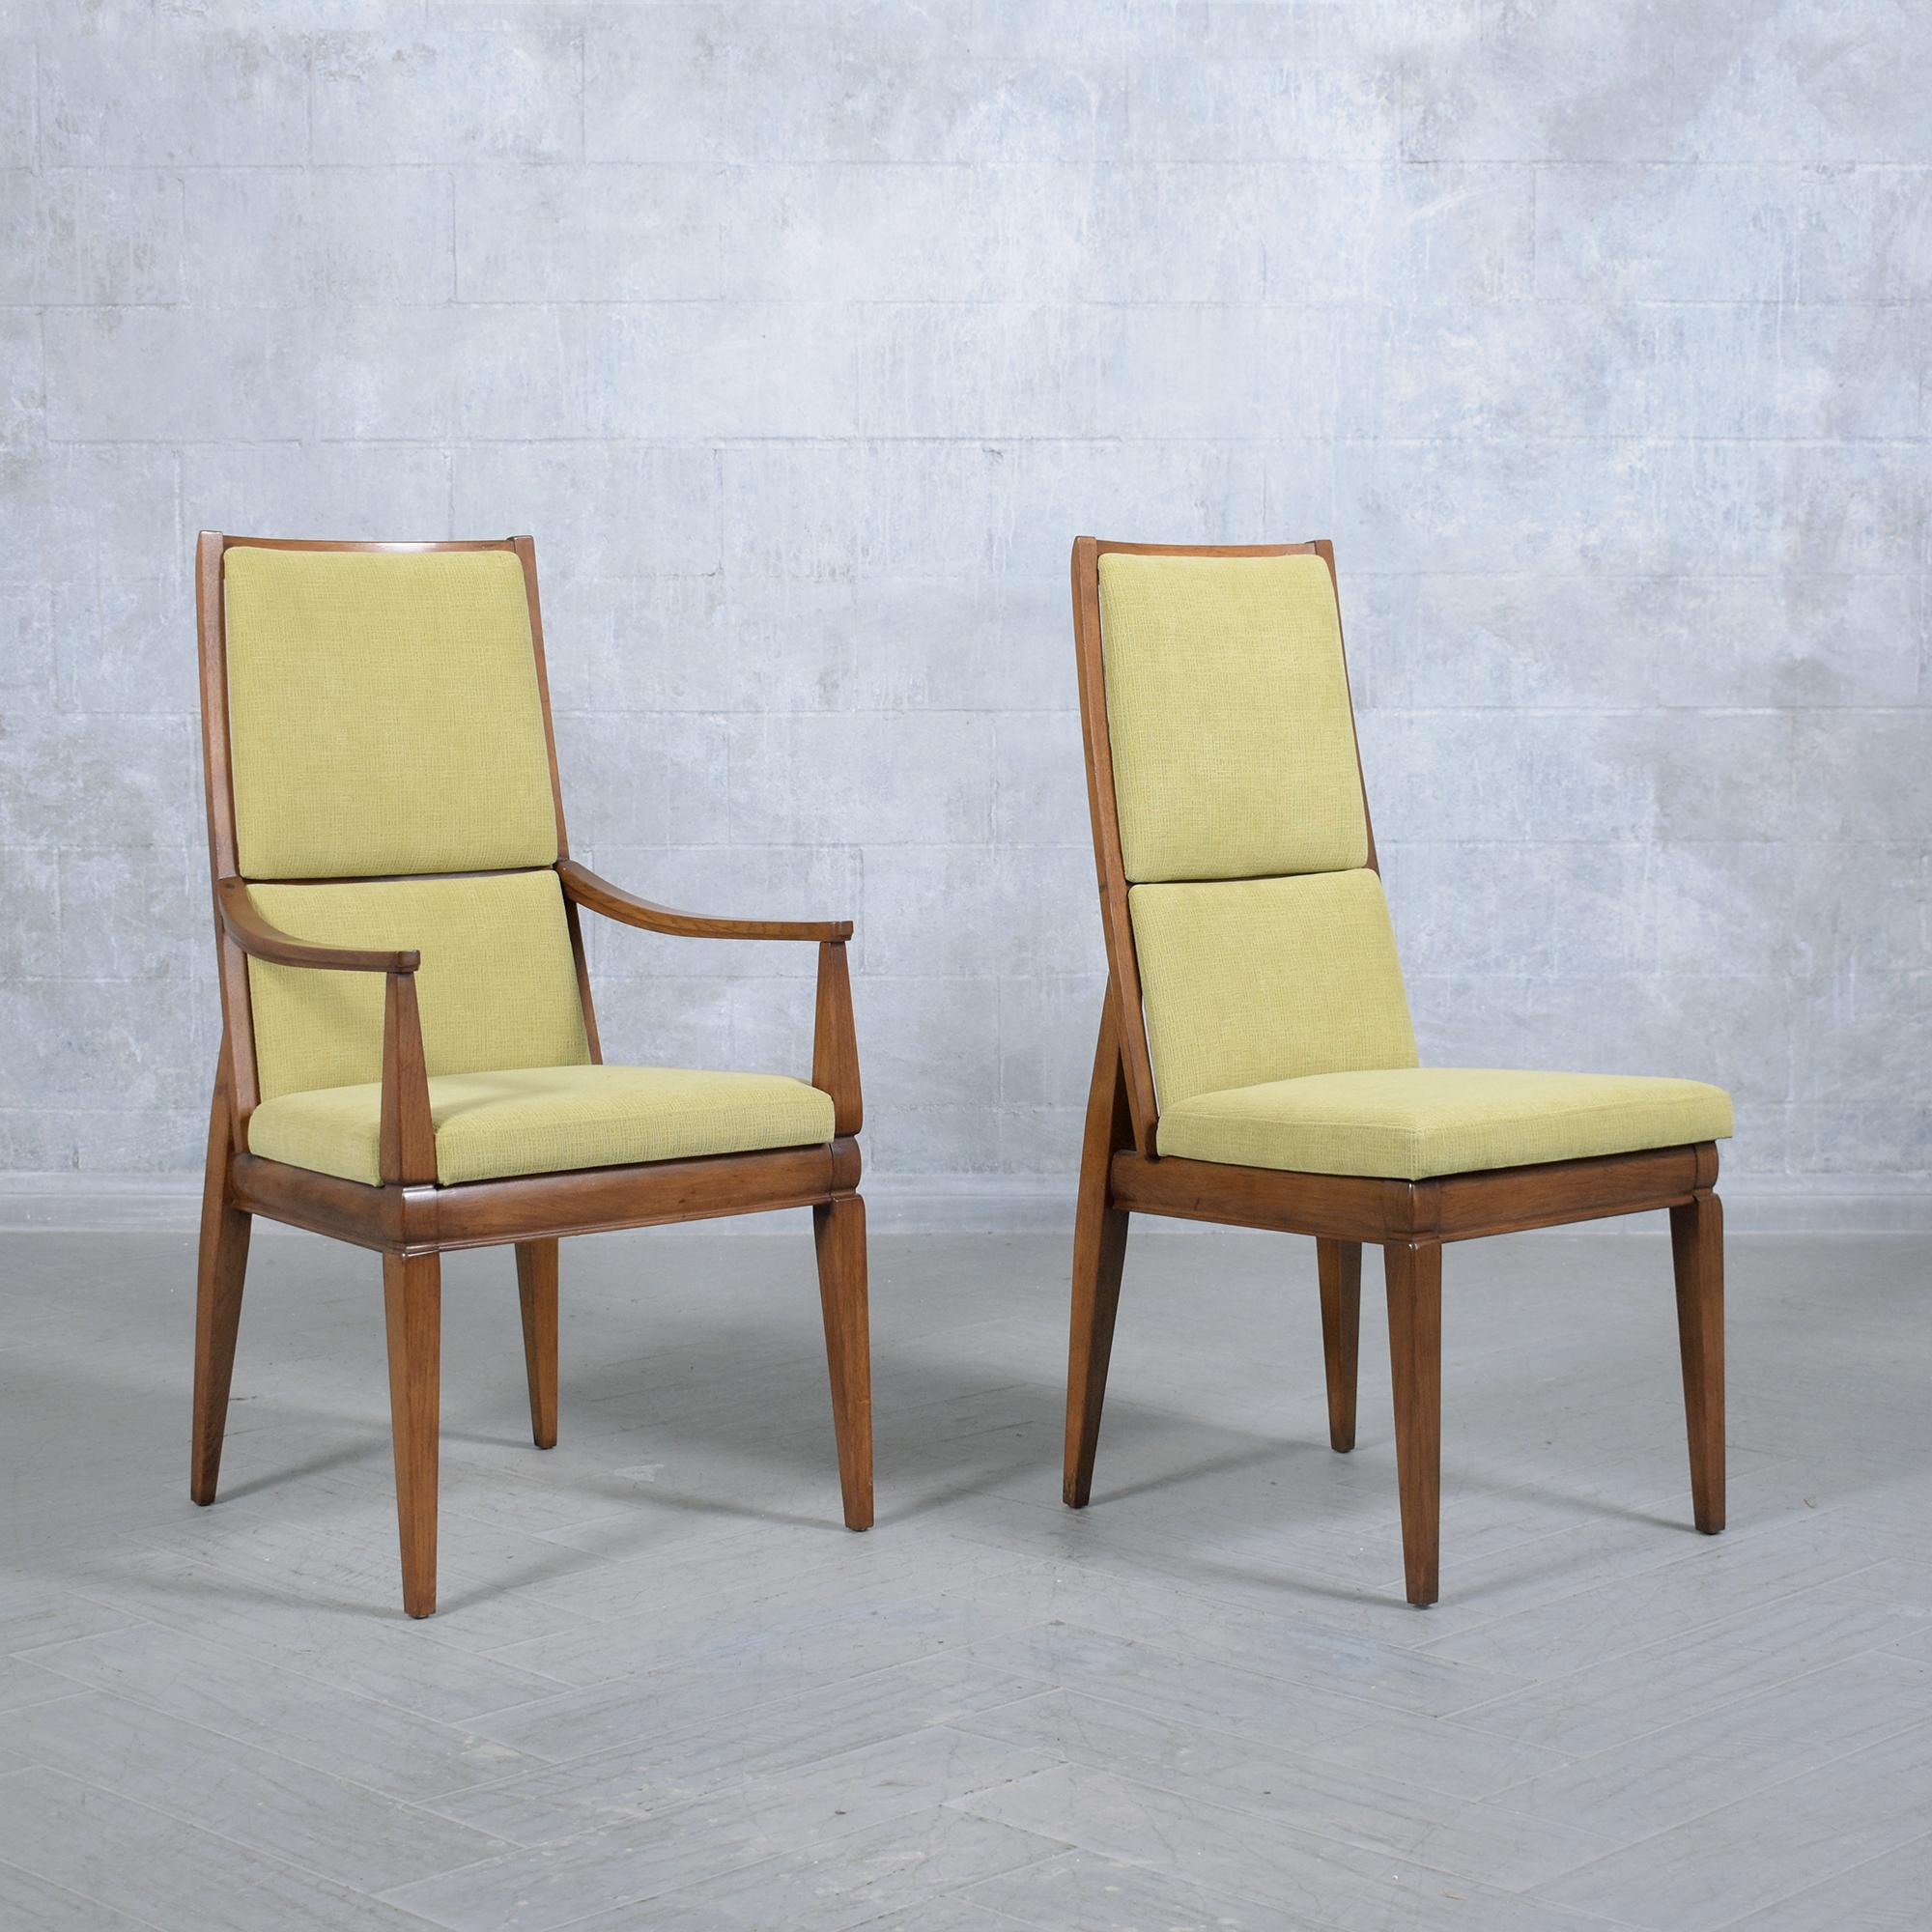 Mid-20th Century 1960s Vintage Modern Dining Chair Set in Walnut with Green Chenille Fabric